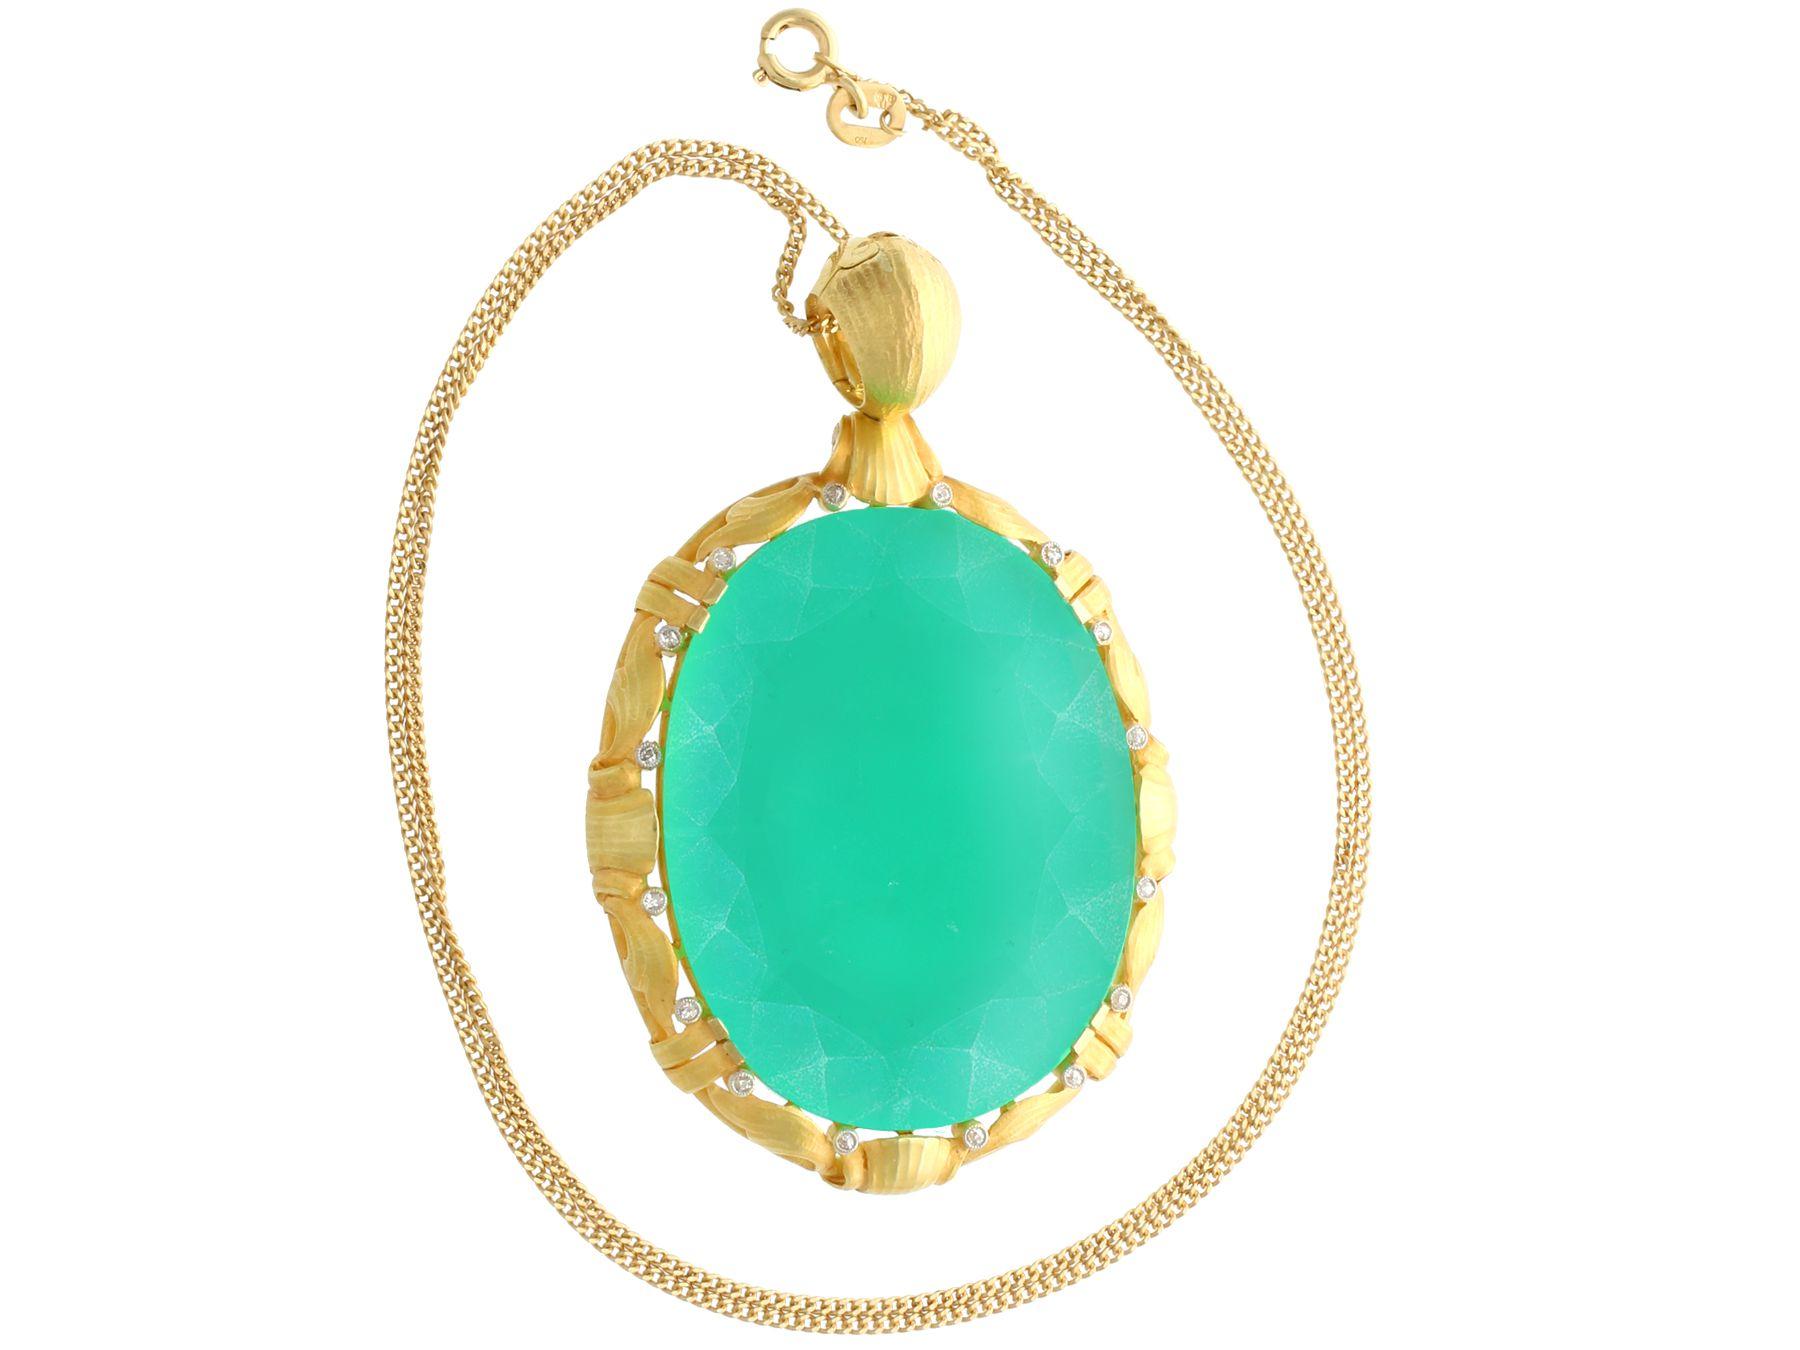 A stunning, fine and impressive antique 51.69 carat chrysoprase (green chalcedony), 0.16 carat diamond, 15k yellow gold pendant; part of our antique jewelry and estate jewelry collections.

This stunning antique cabochon cut chrysoprase pendant has